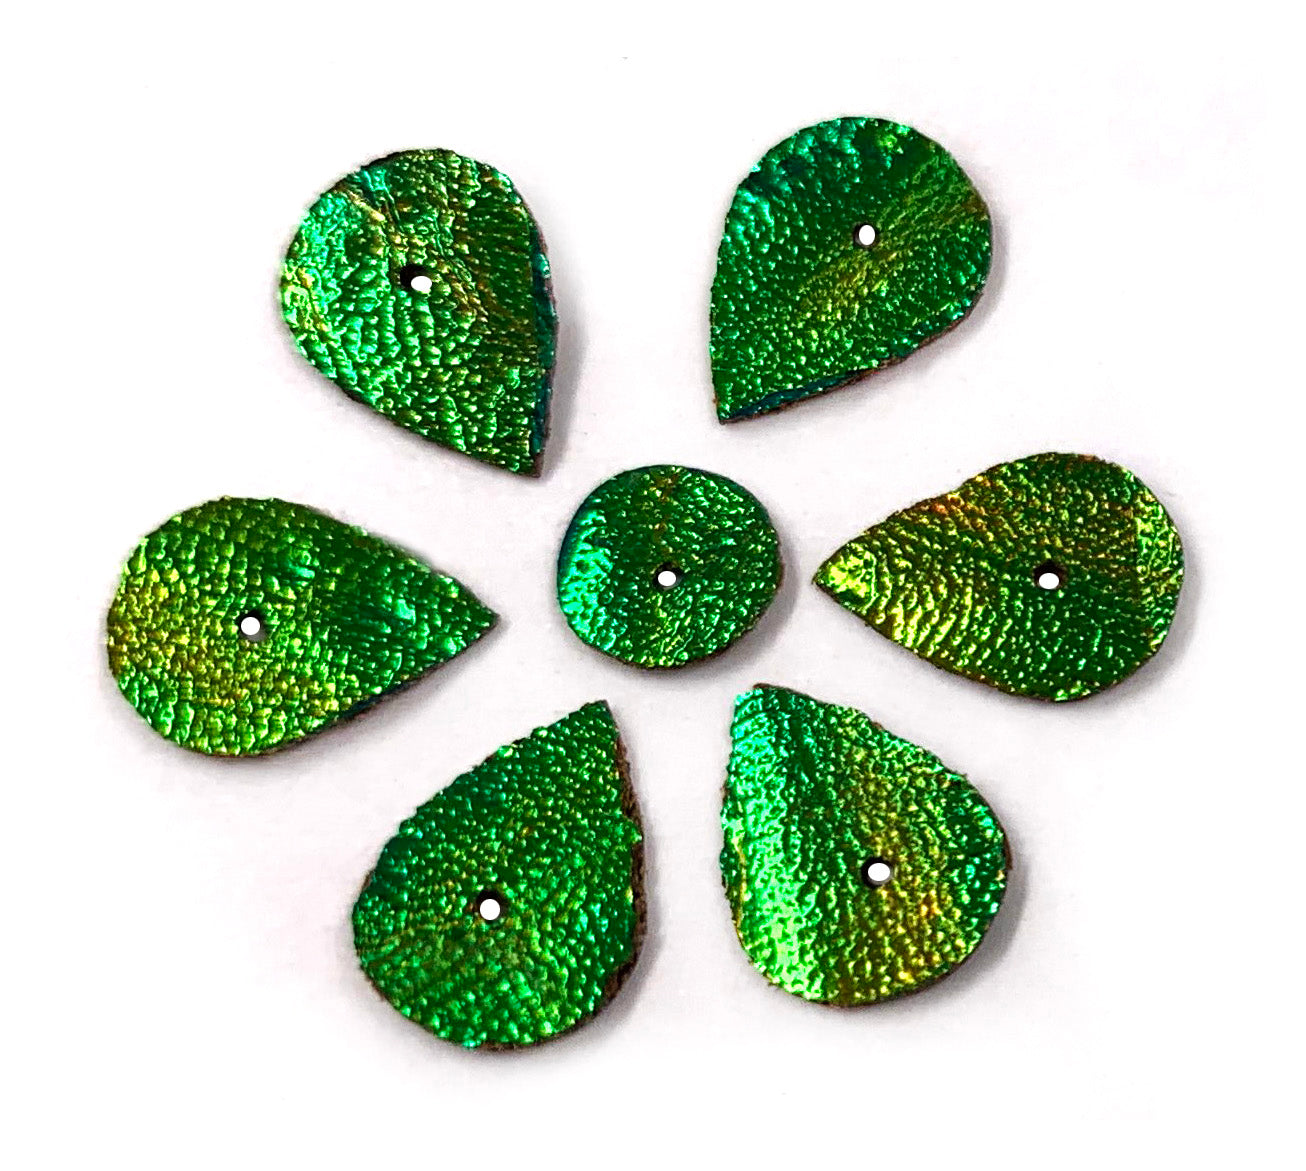 Jewel Beetle Wings UNDRILLED NO-HOLE 100 Pcs Natural Wings - Circle 8 MM